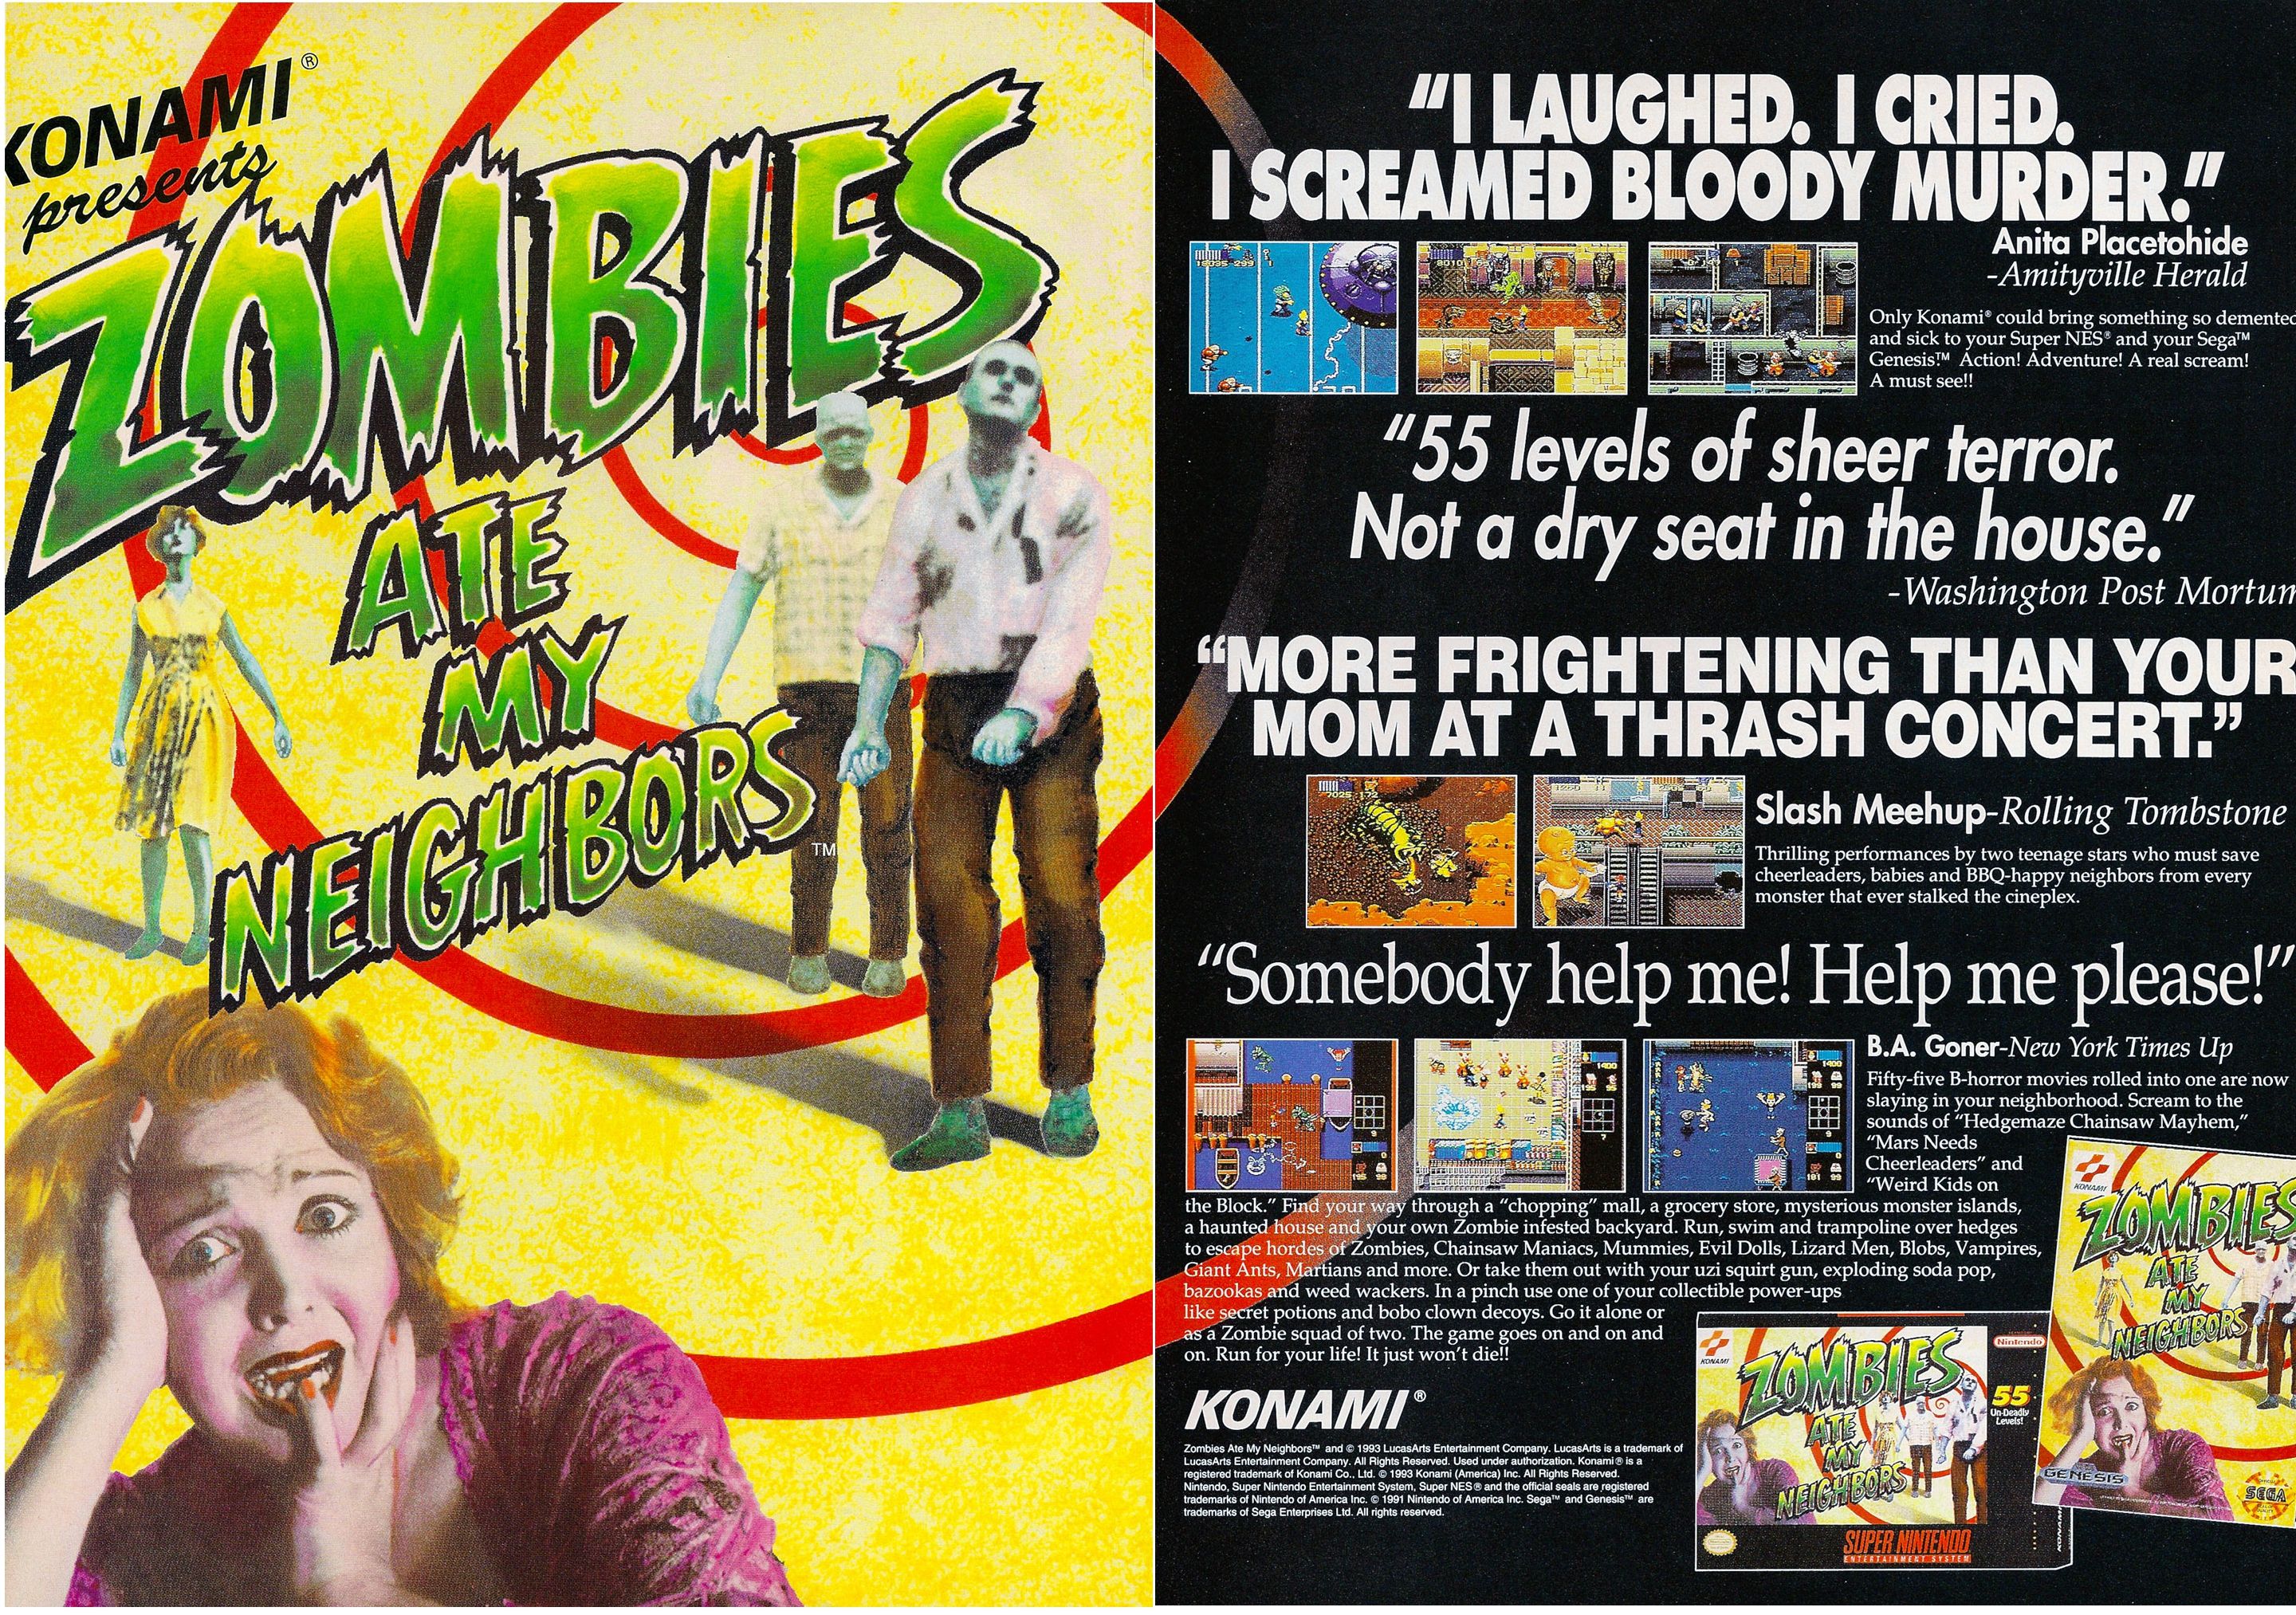 Stop the zombie apocalypse with a water pistol. Zombies Ate My Neighbours (or just Zombies here) was a collaboration between LucasArts and Konami. It was one of LucasArts’ earliest console […]